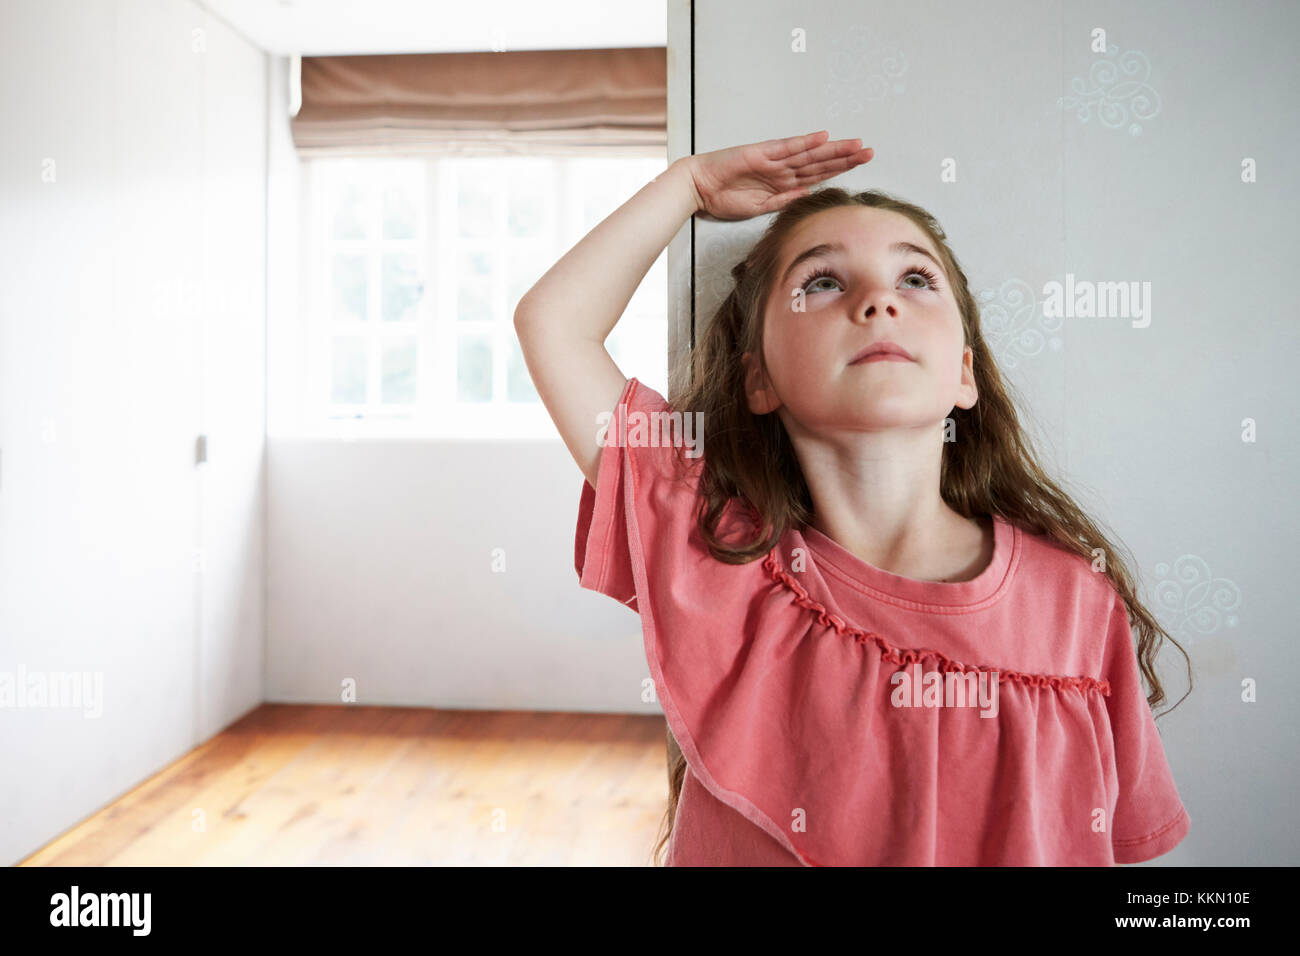 Girl Measuring Height Standing Against Wall At Home Stock Photo